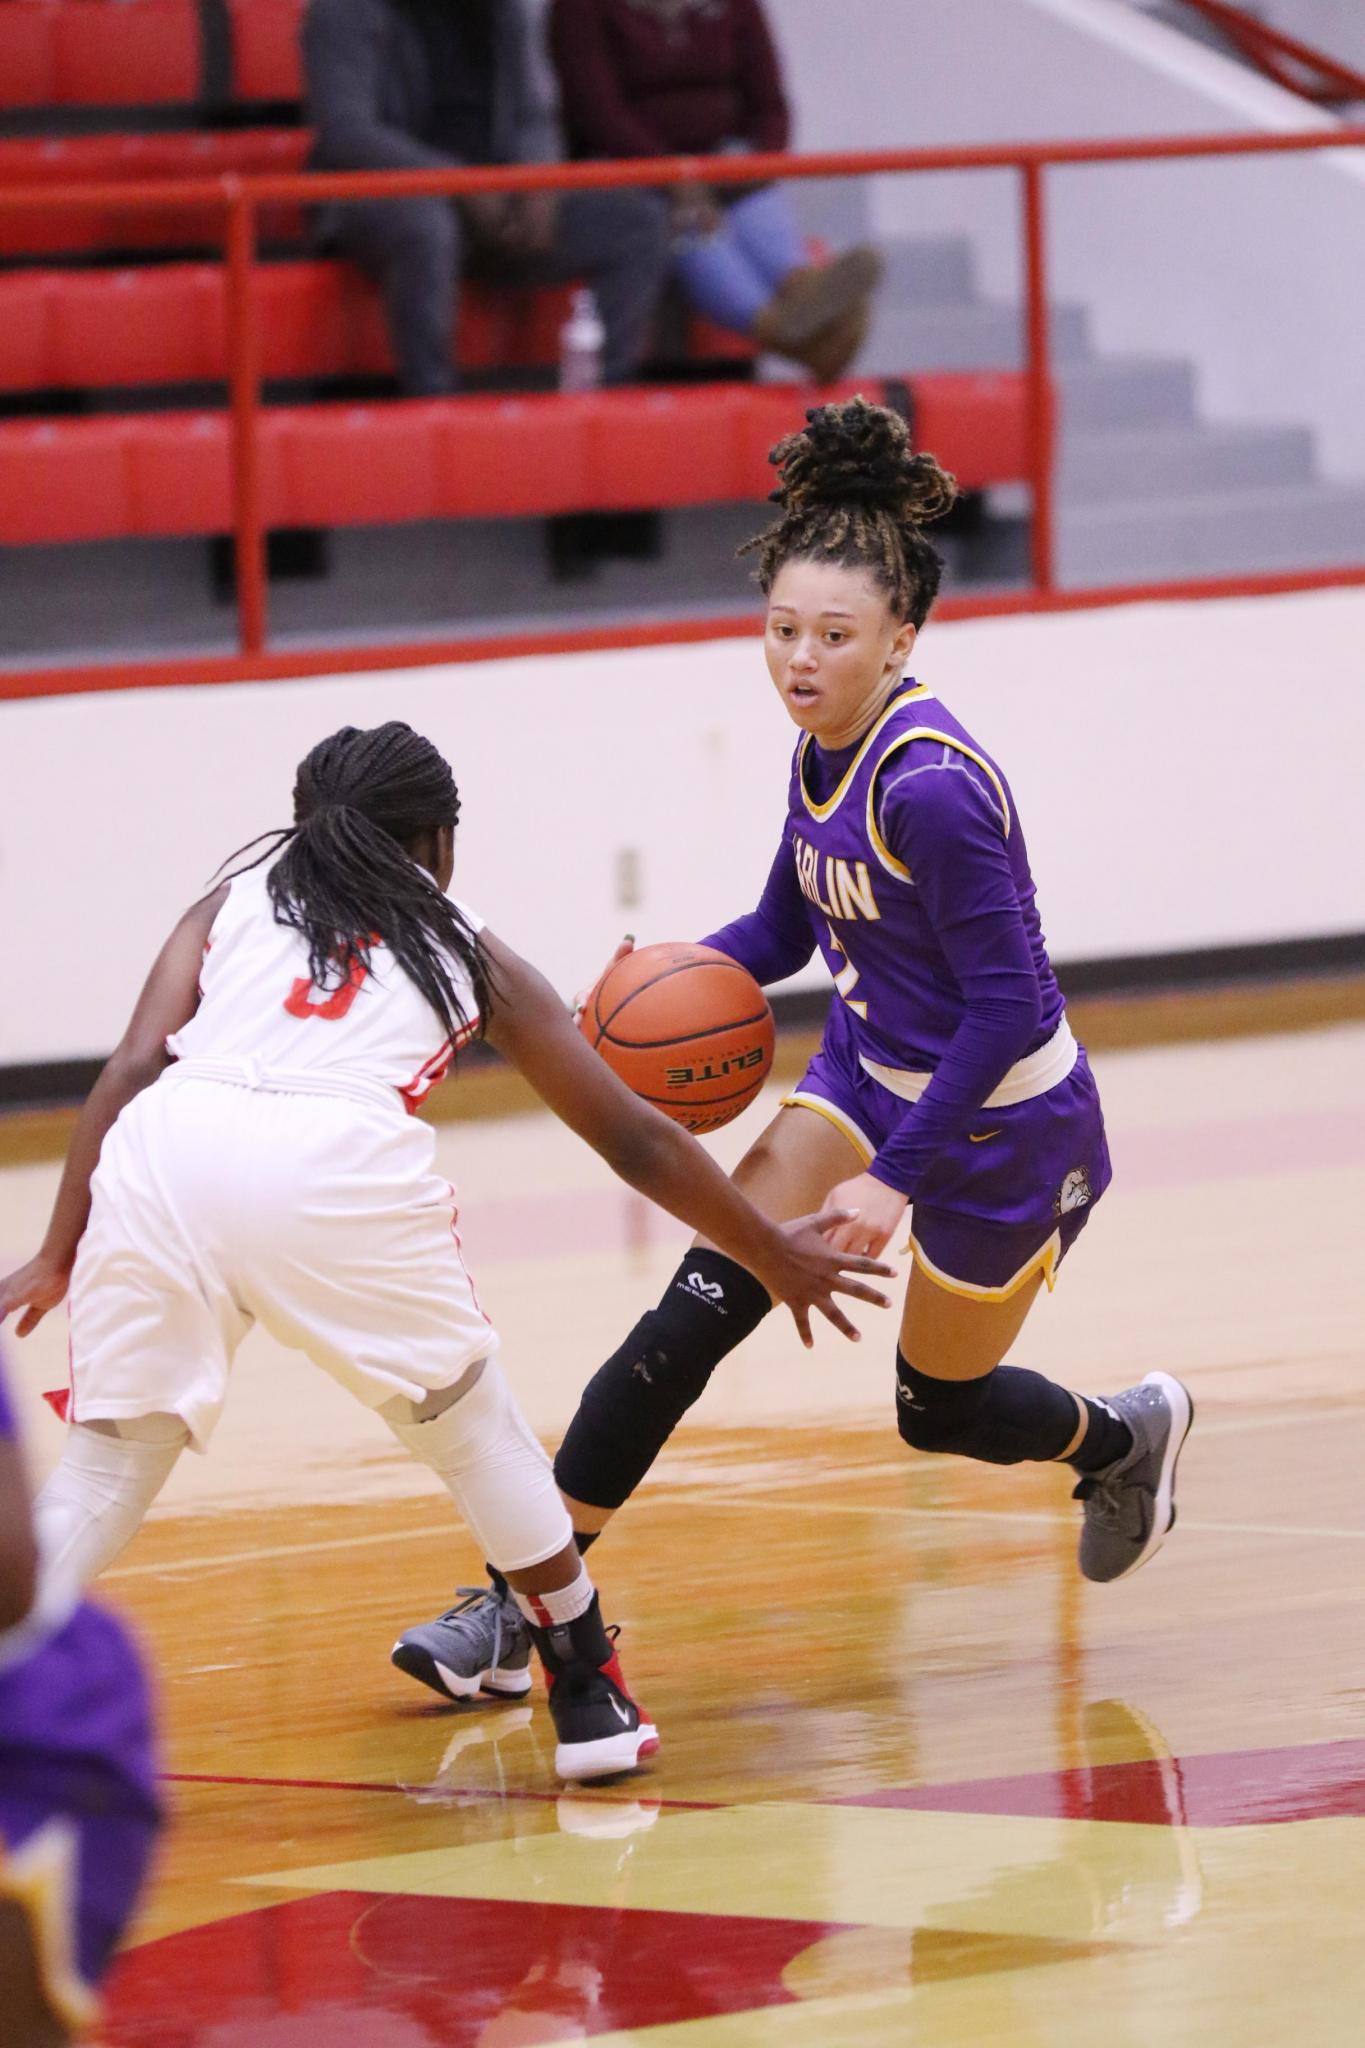 Marlin's McKenna Johnson dribbles against Groesbeck's Kyla Evans (5) during a game at Groesbeck on Friday night.Photo by Angela Crane/For the Marlin Democrat